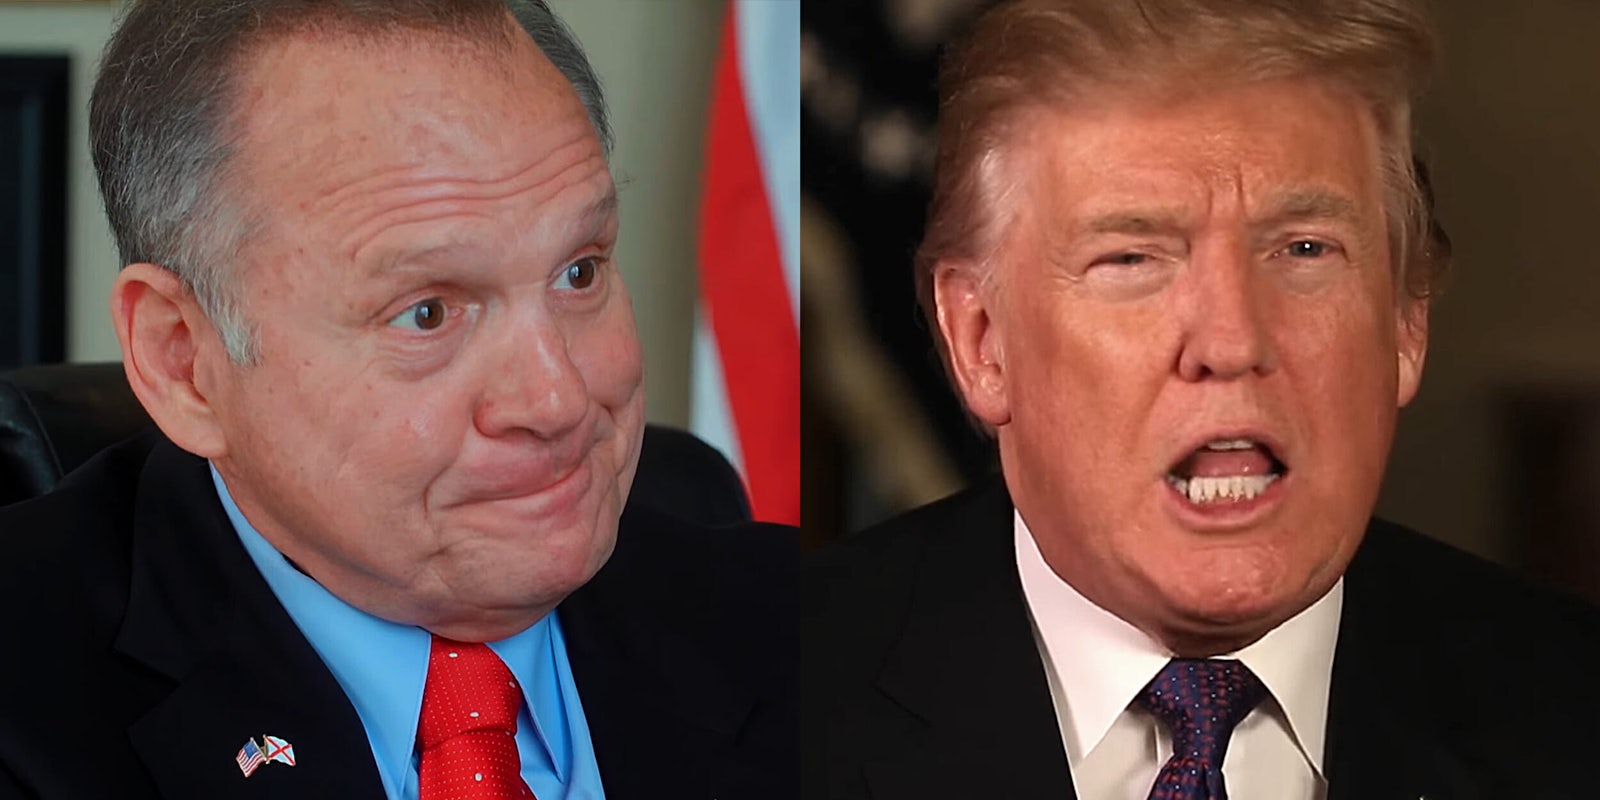 Roy Moore and Donald Trump